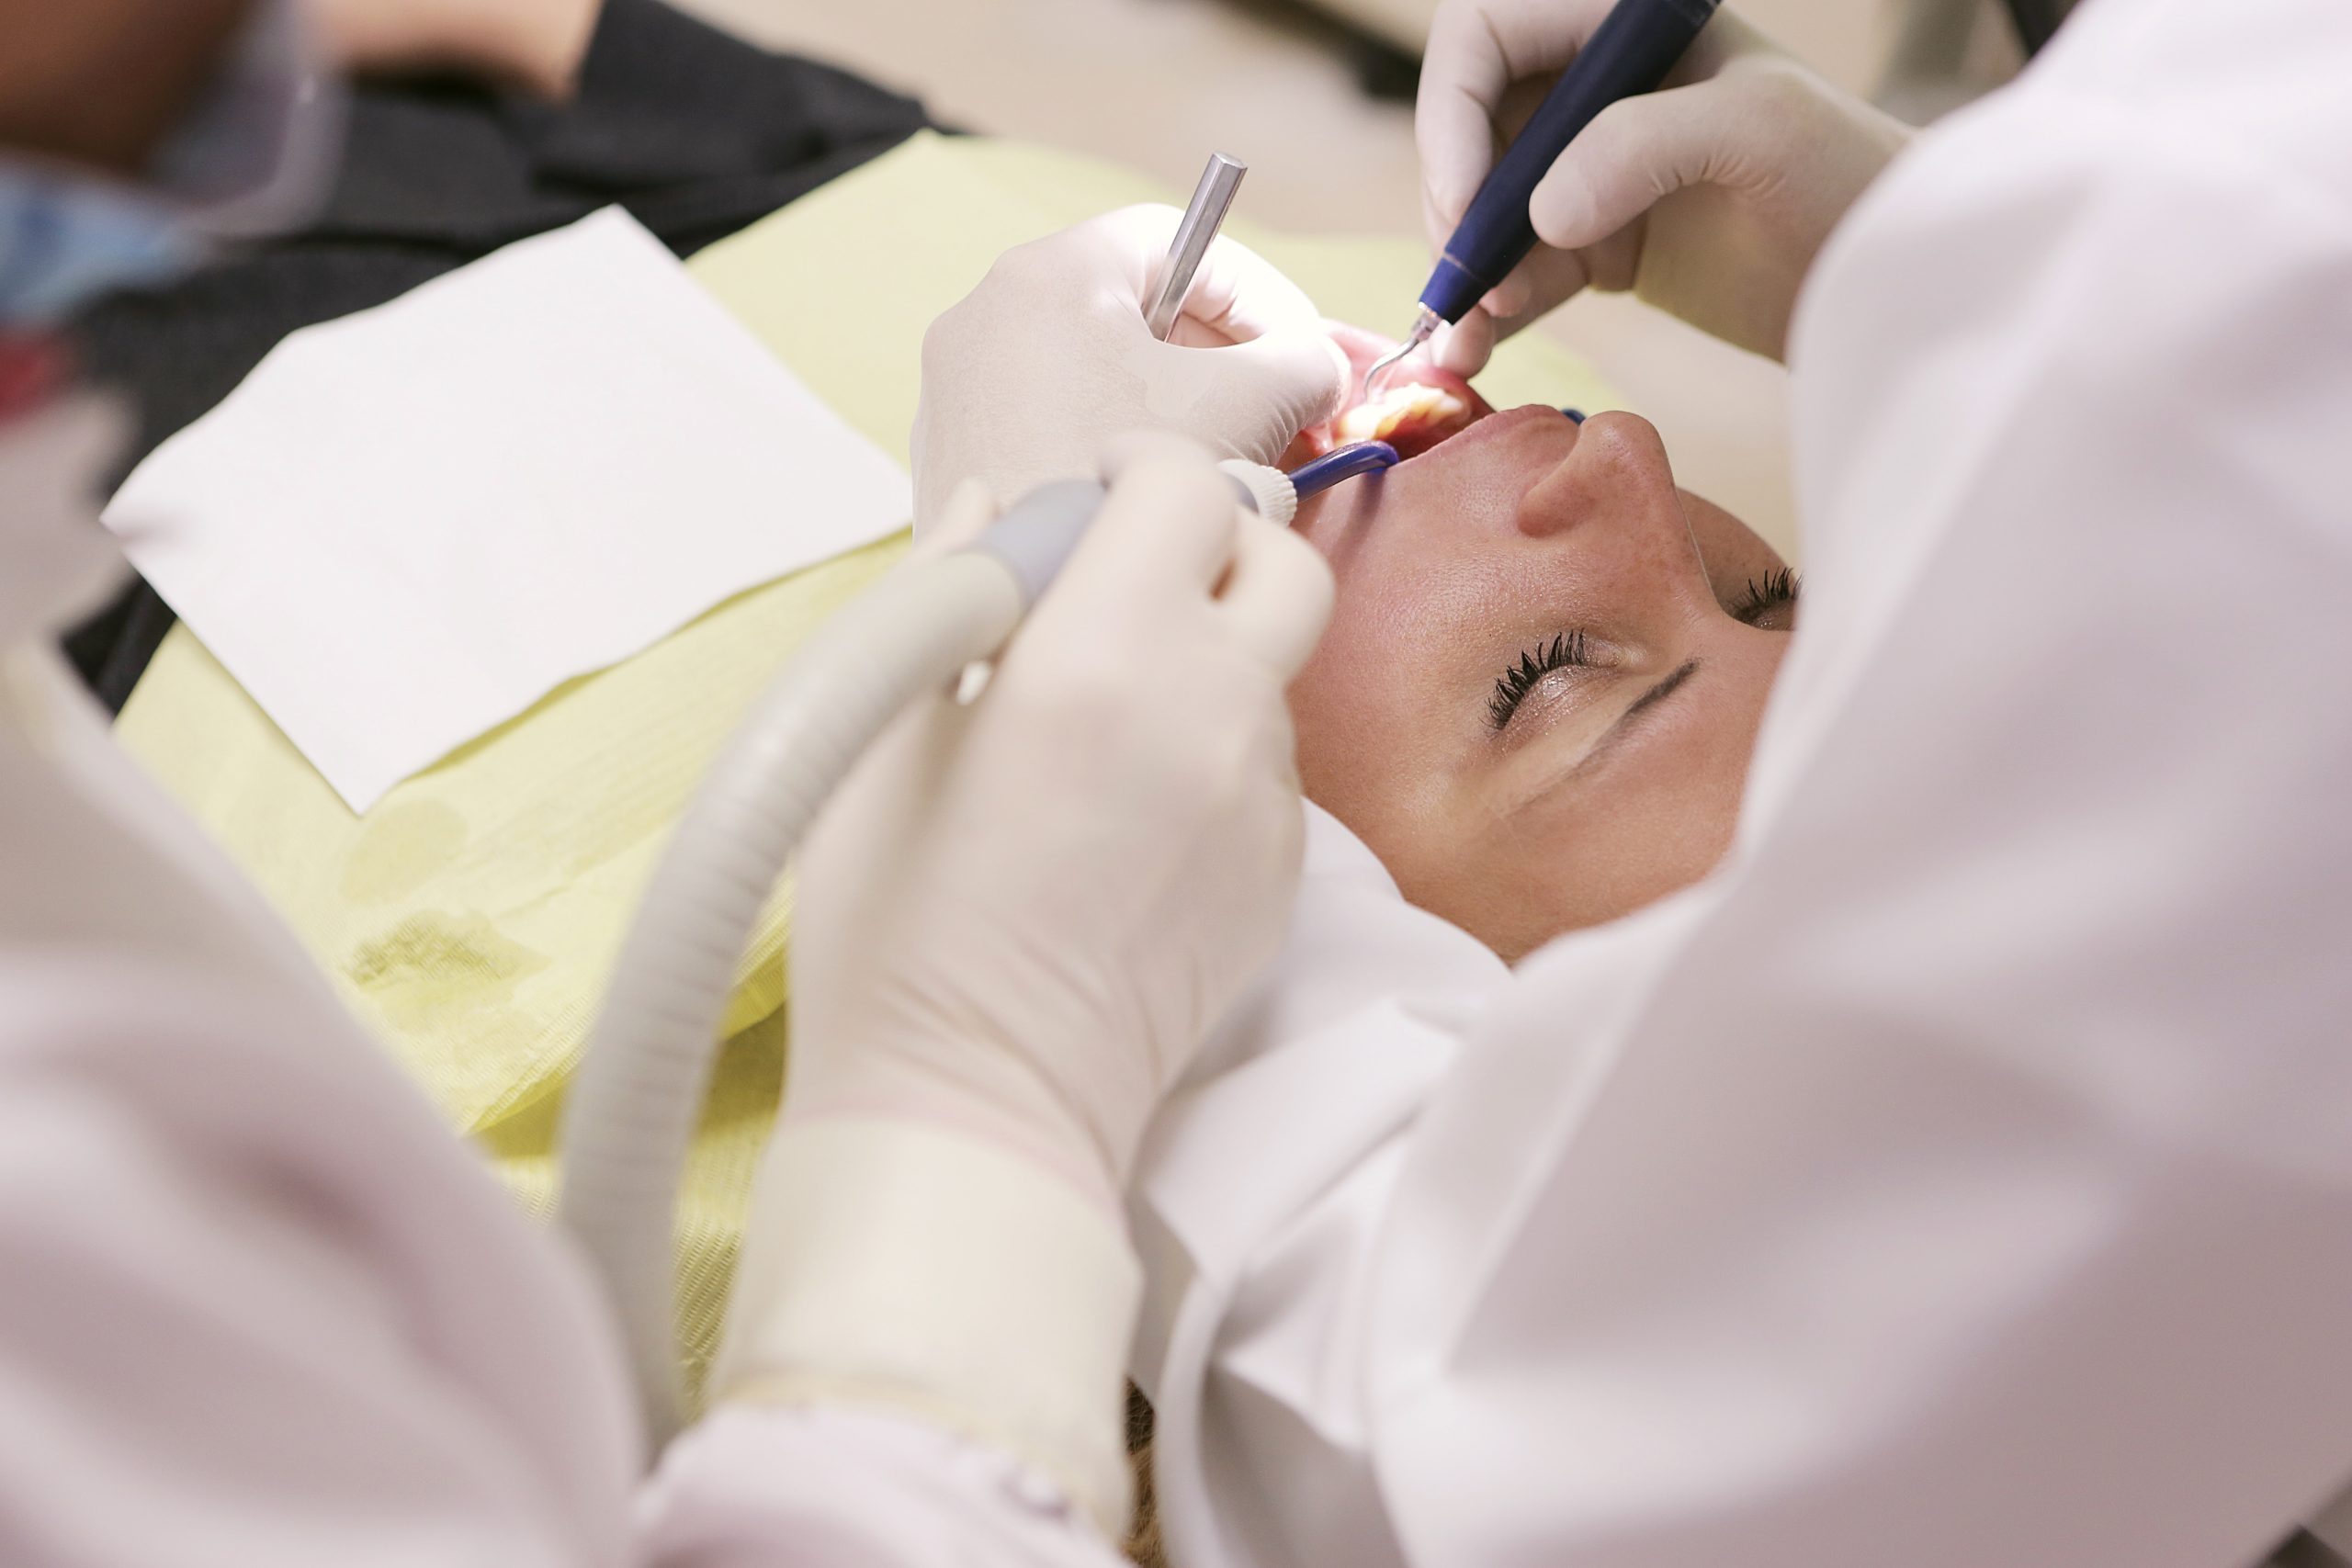 Buccal Fat Removal: Everything You Need To Know About This Trending Procedure